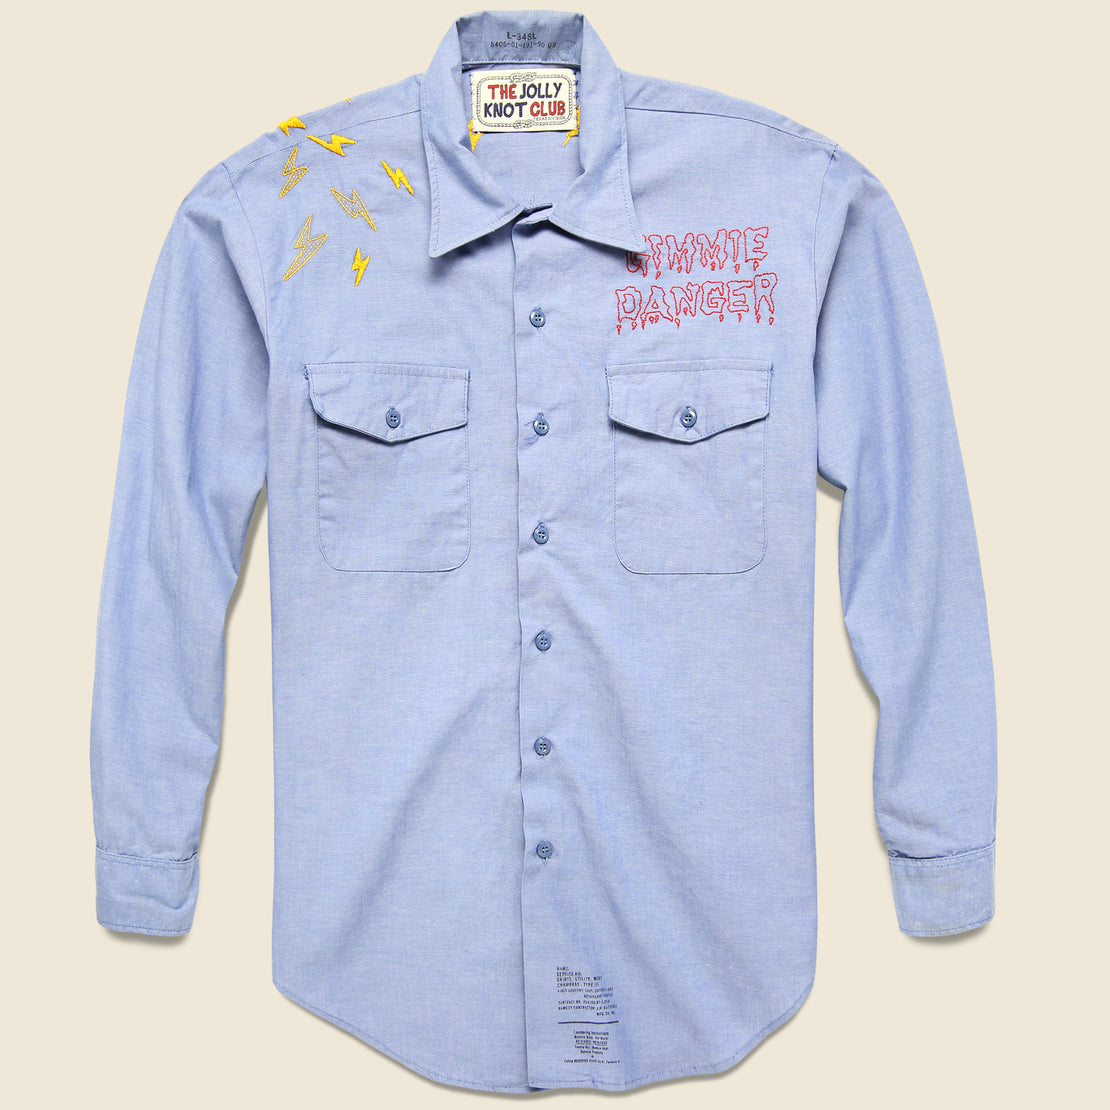 Embroidered Chambray Shirt - She Got a TV Eye on Me - Jolly Knot Club - STAG Provisions - One & Done - Apparel